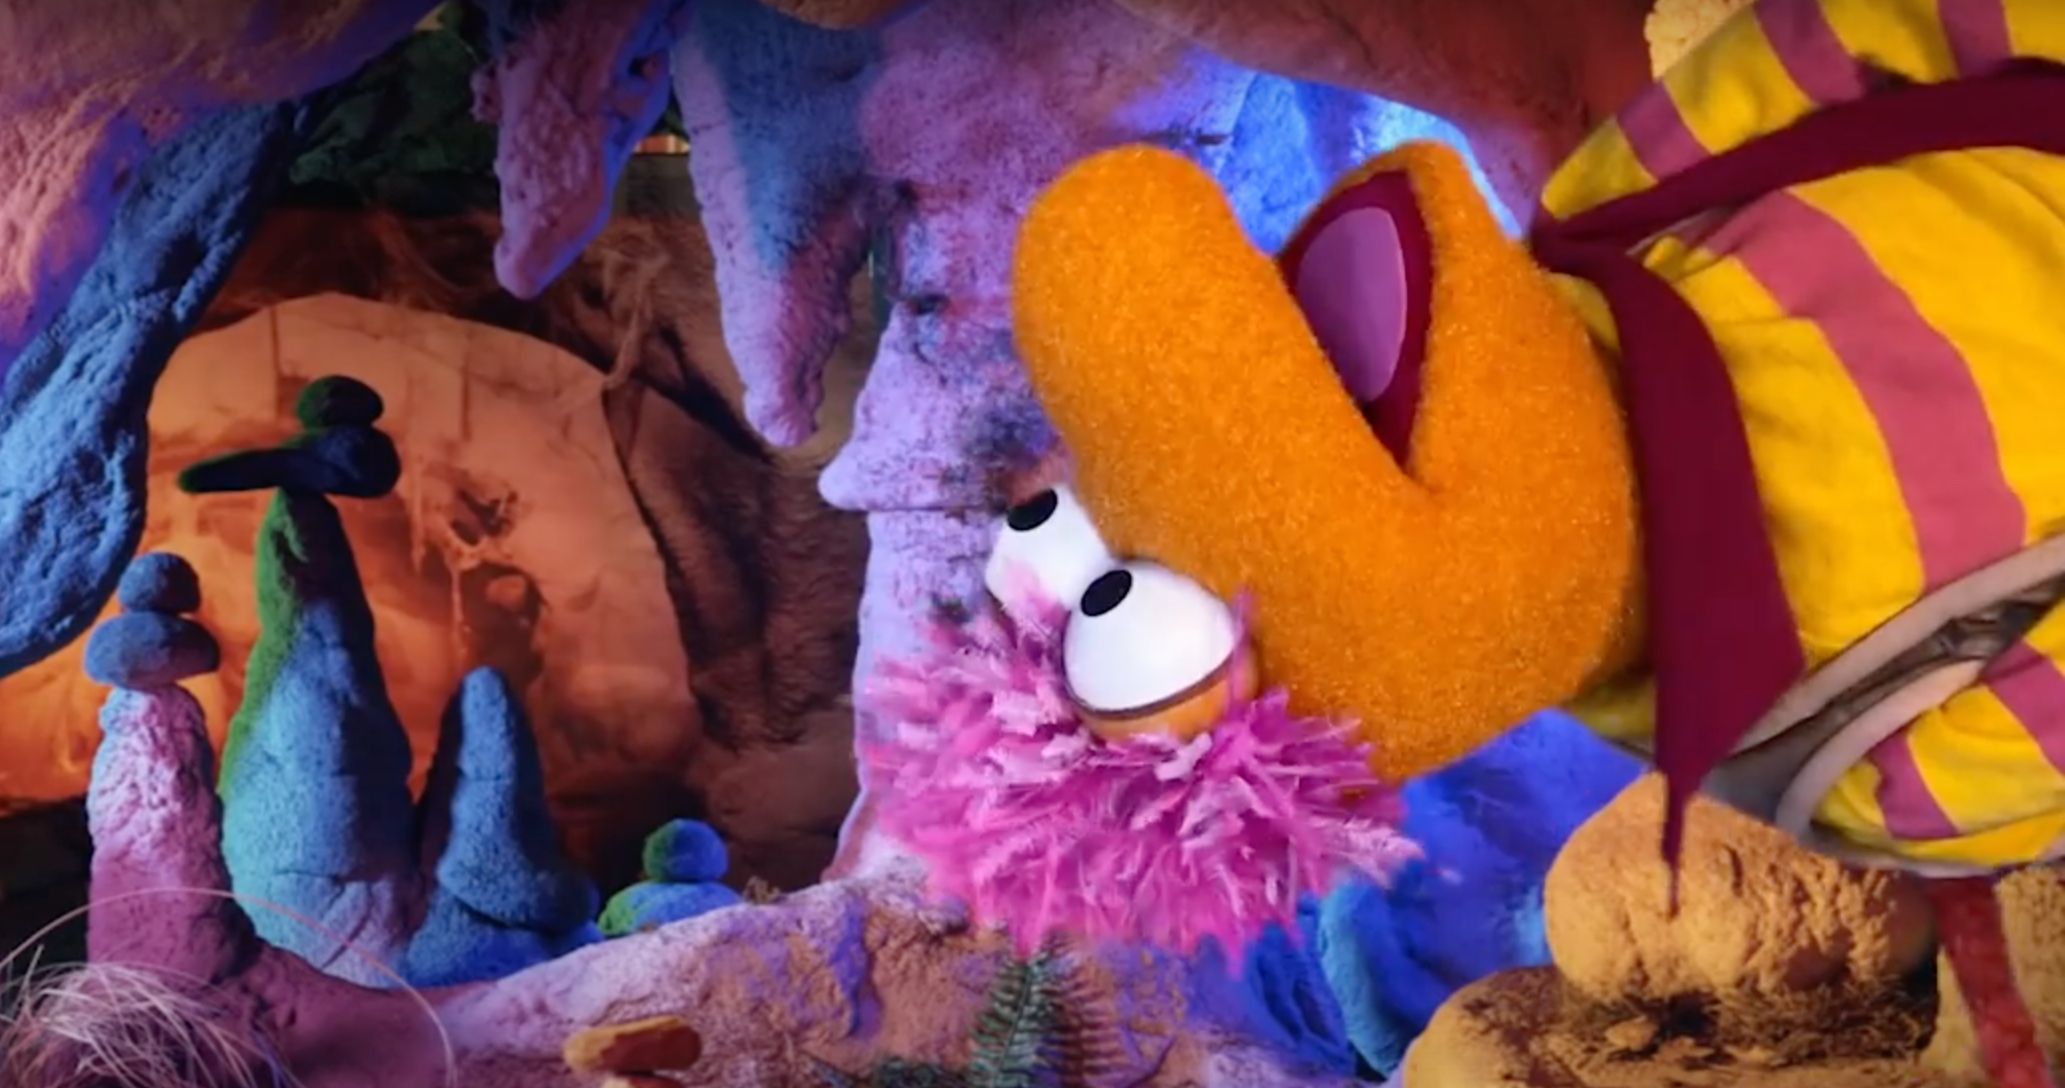 Fraggle Rock: Rock On Trailer Brings Jim Henson's Iconic Muppets to Apple TV+